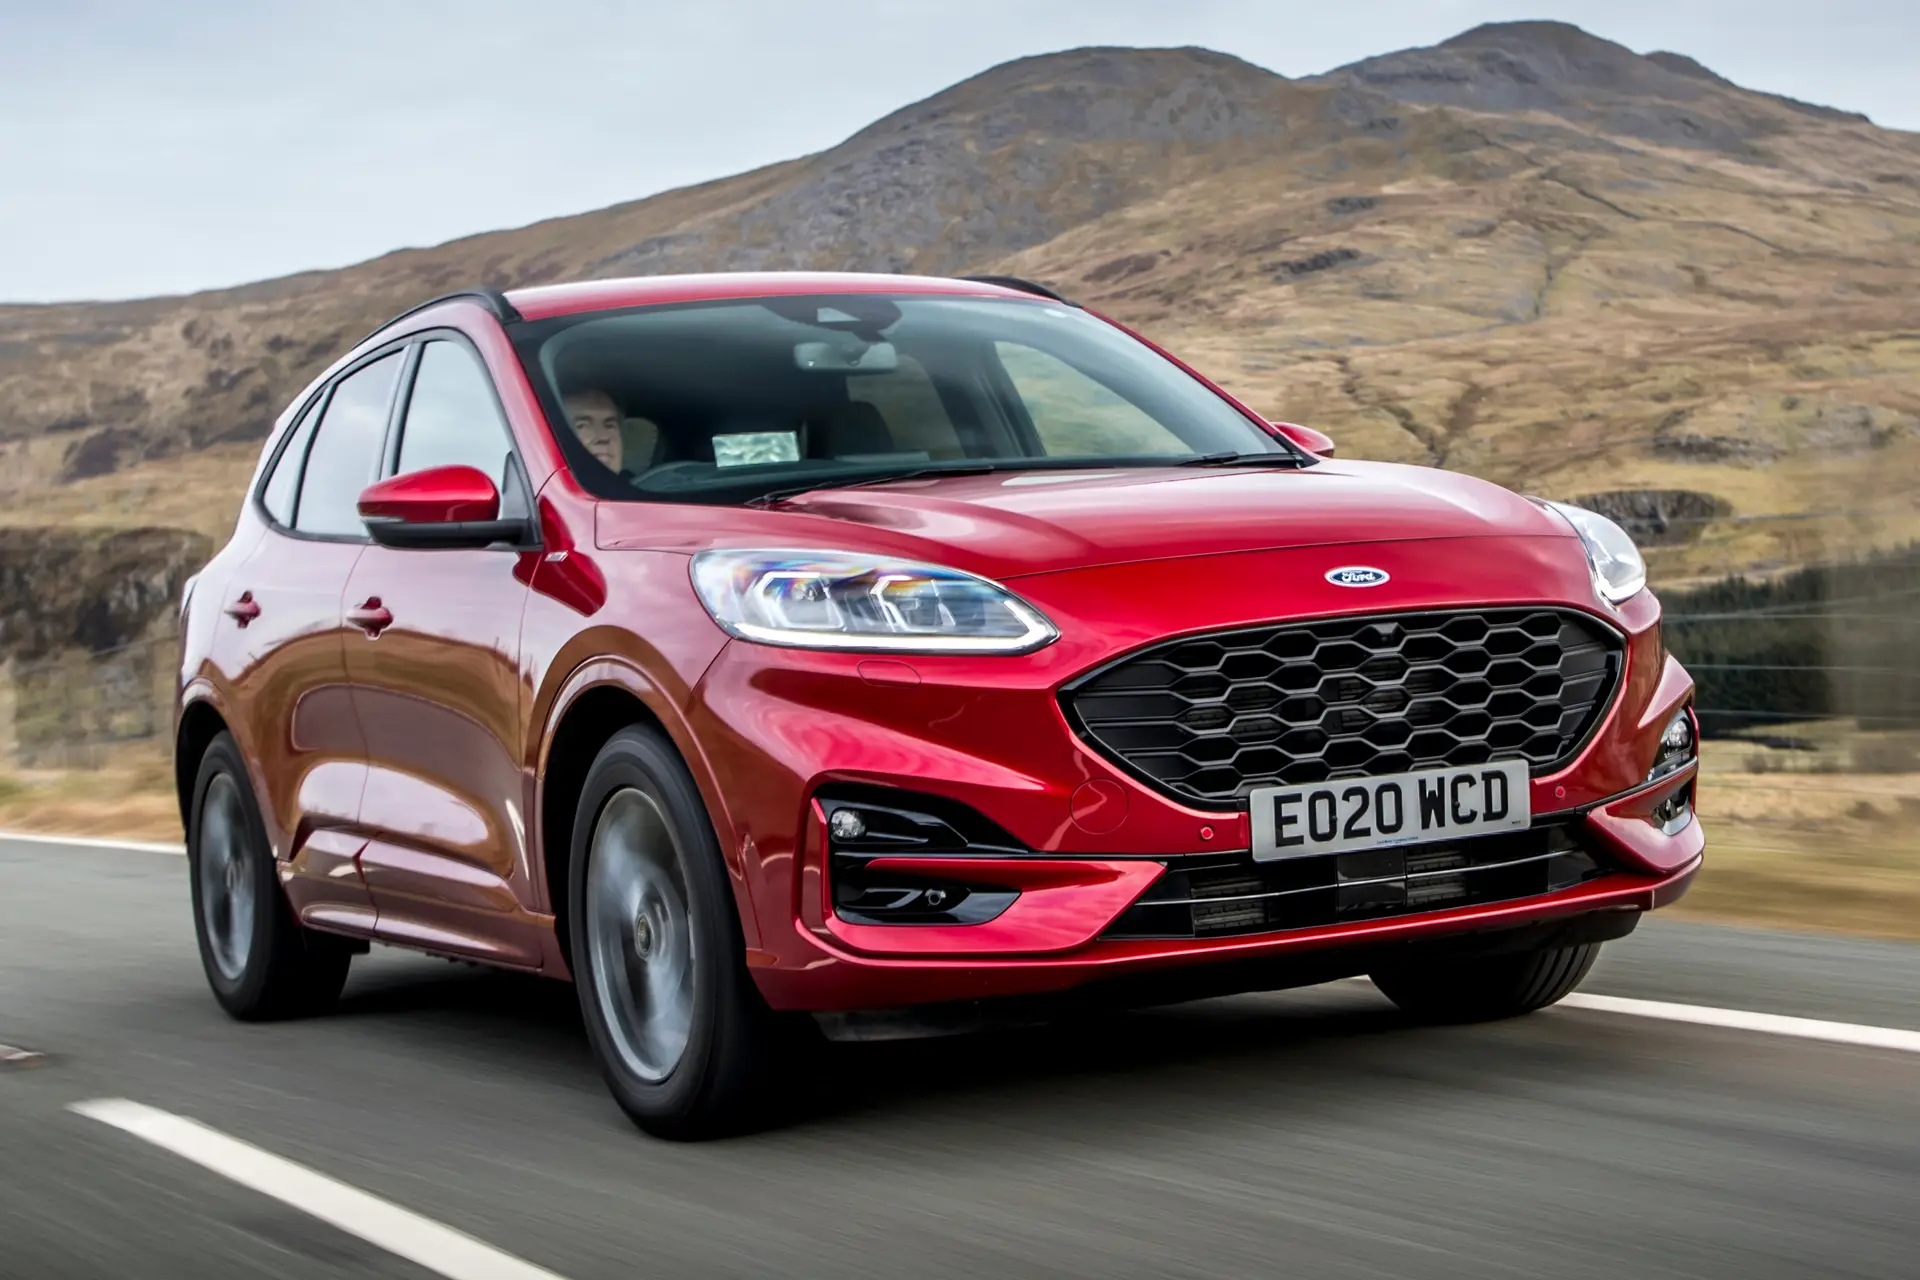 Ford Kuga PHEV on long-term test: a plug-in hybrid that really grows on you